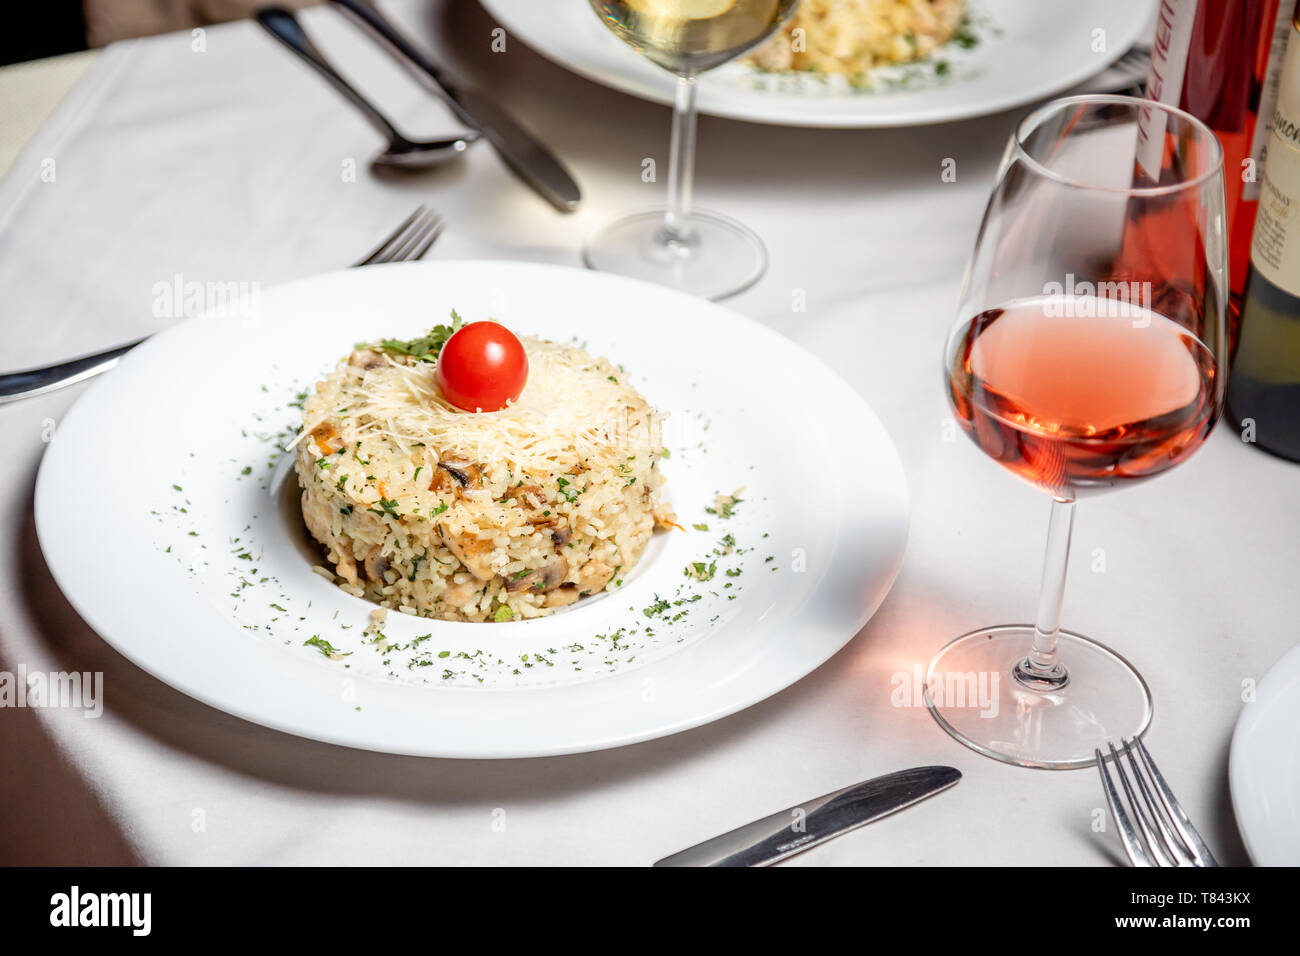 Risotto with white wine glass served at restaurant table Stock Photo